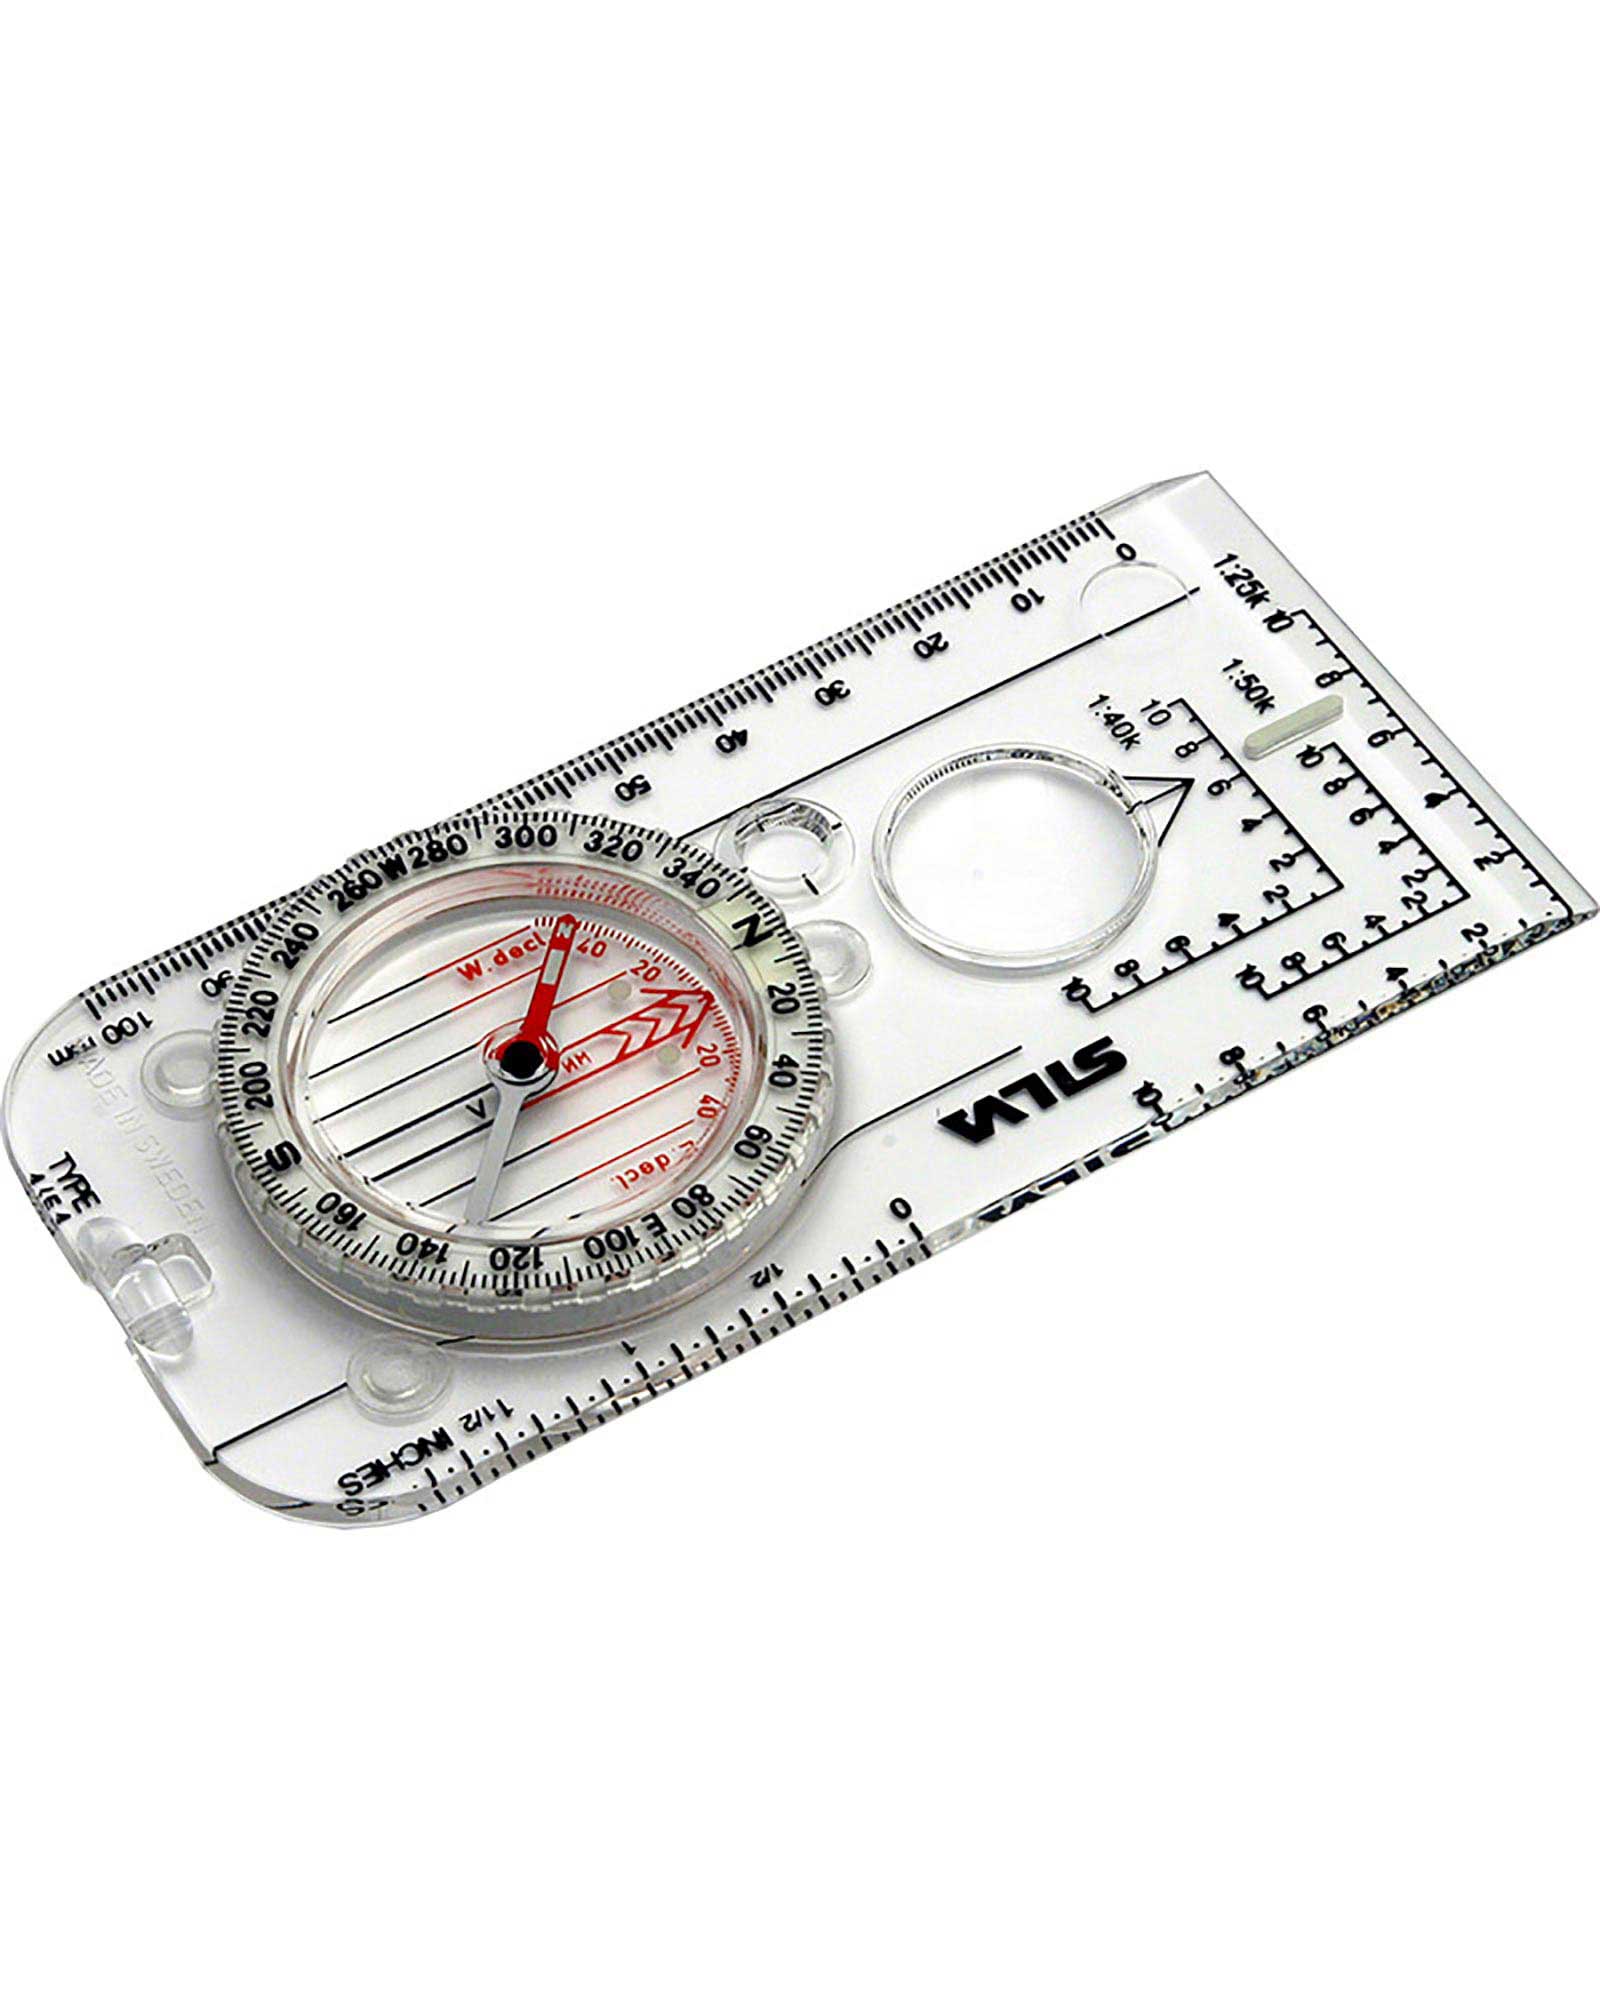 Product image of Silva expedition 4 Compass